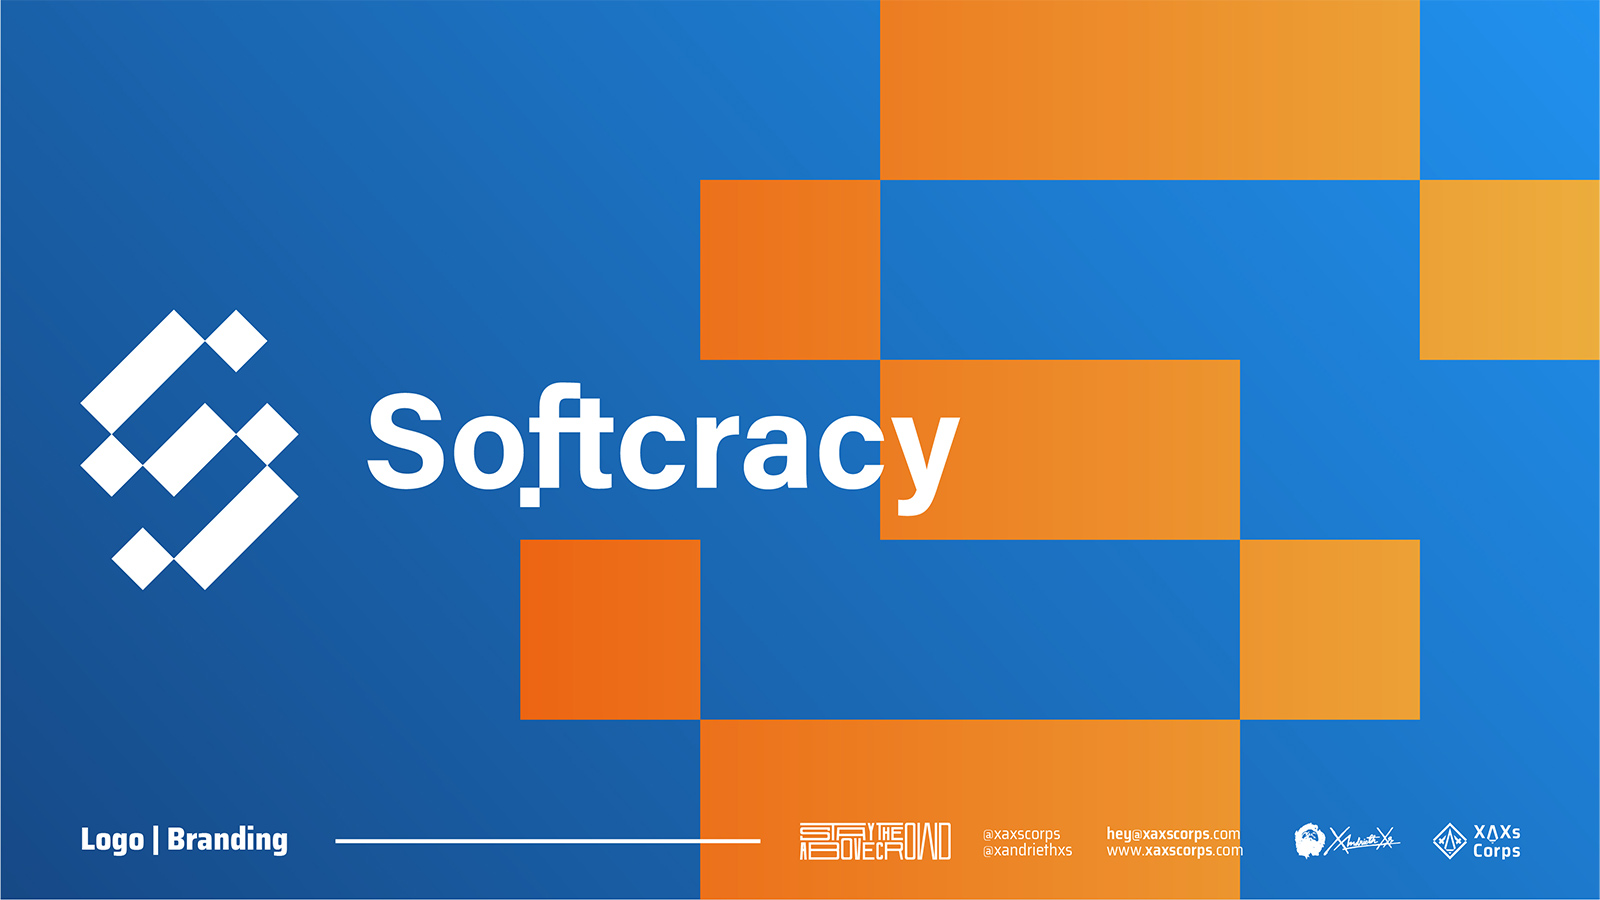 Softcracy: Logo and Branding